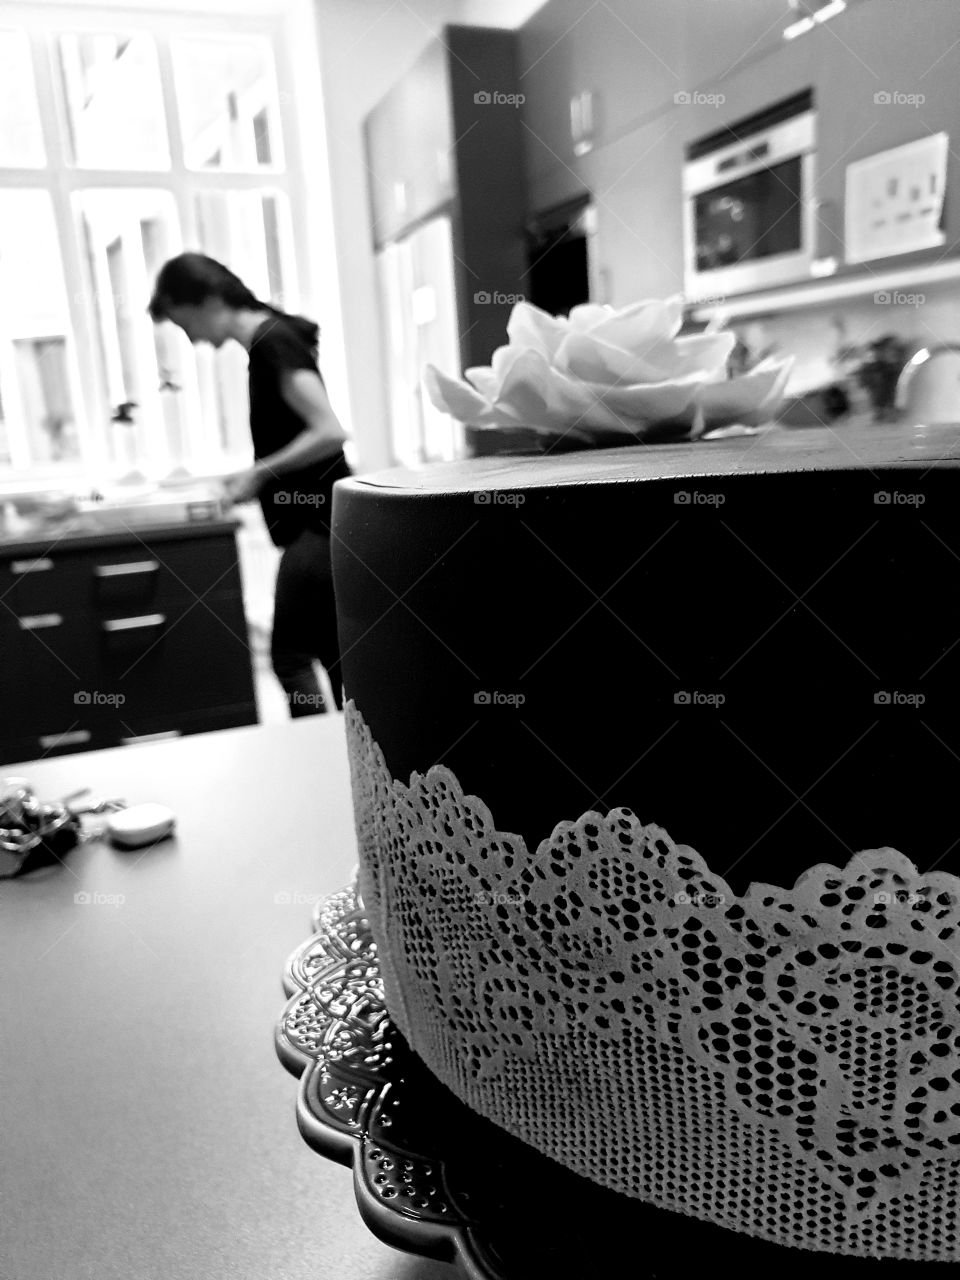 Black and white cake in a kitchen.